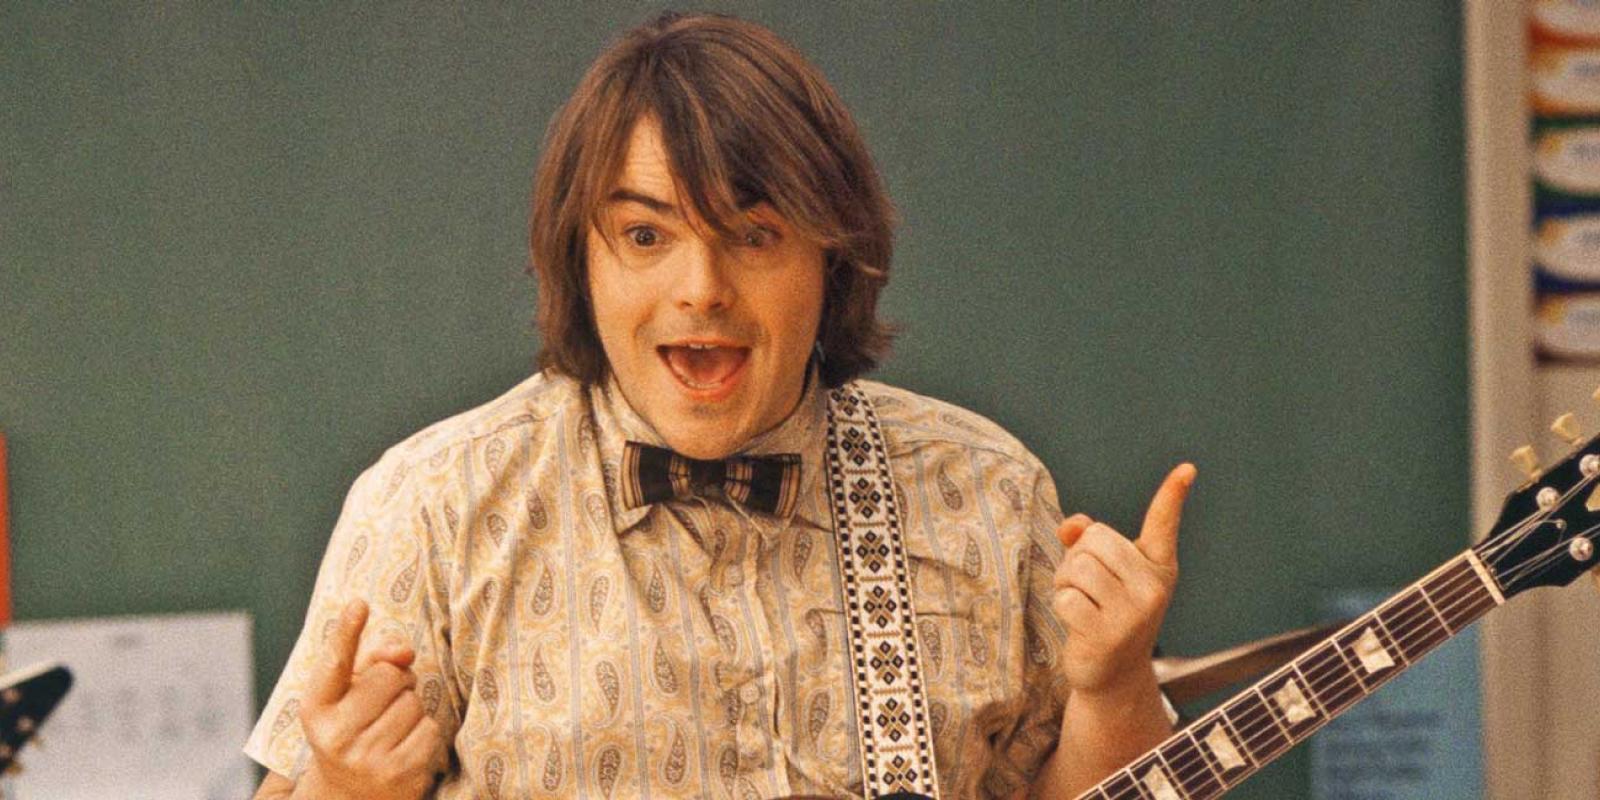 15 Years Later: The Oral History of 'School of Rock